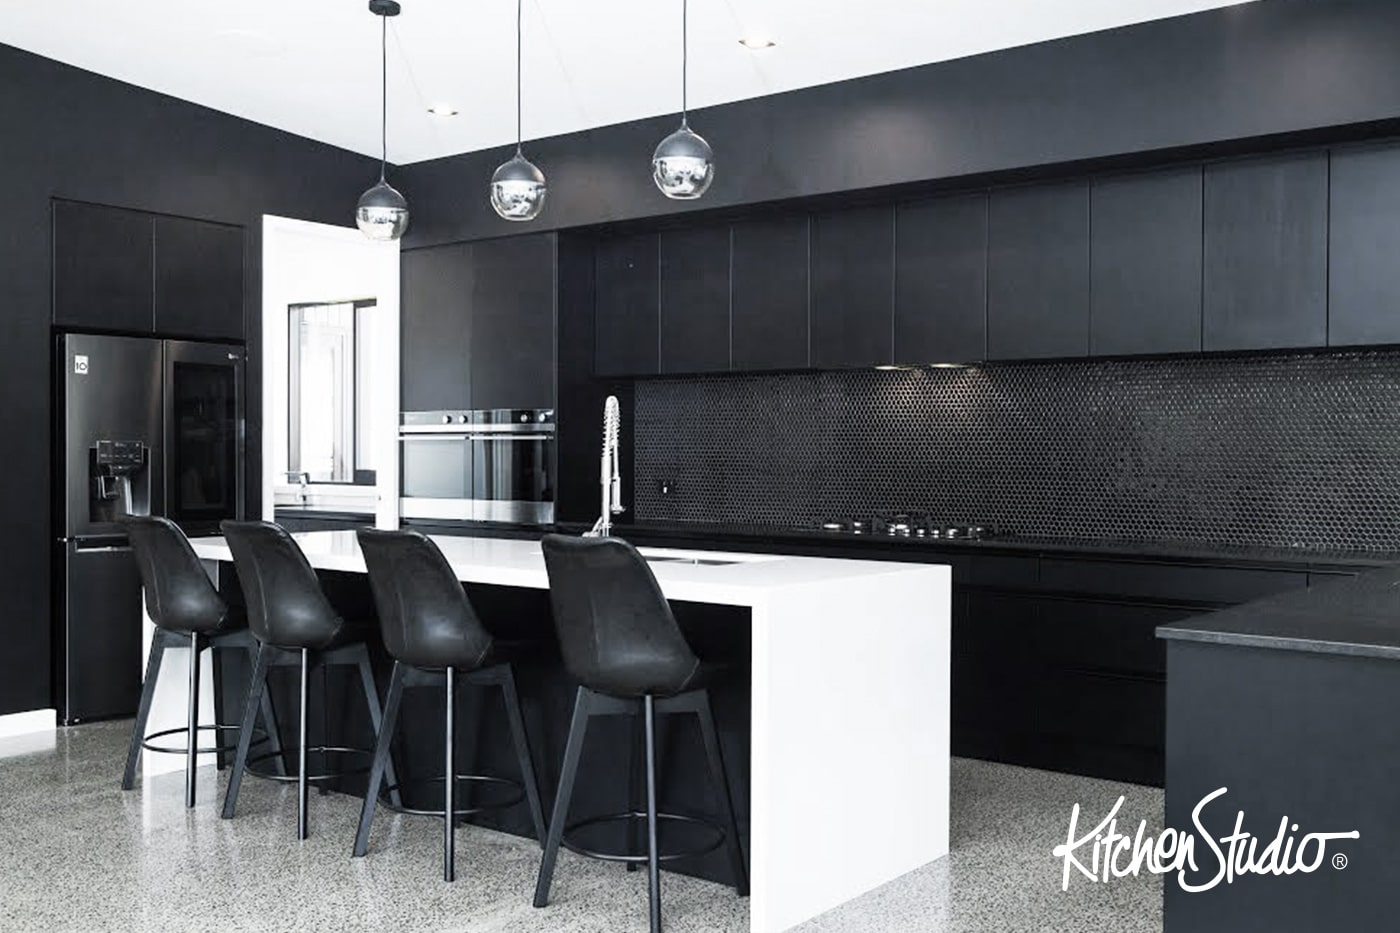 Kitchen Studio Design Awards 2019 A Black And White Decision By Andrea Ellis Kitchen Studio North Shore Kitchen Of The Year Peoples Choice Winner